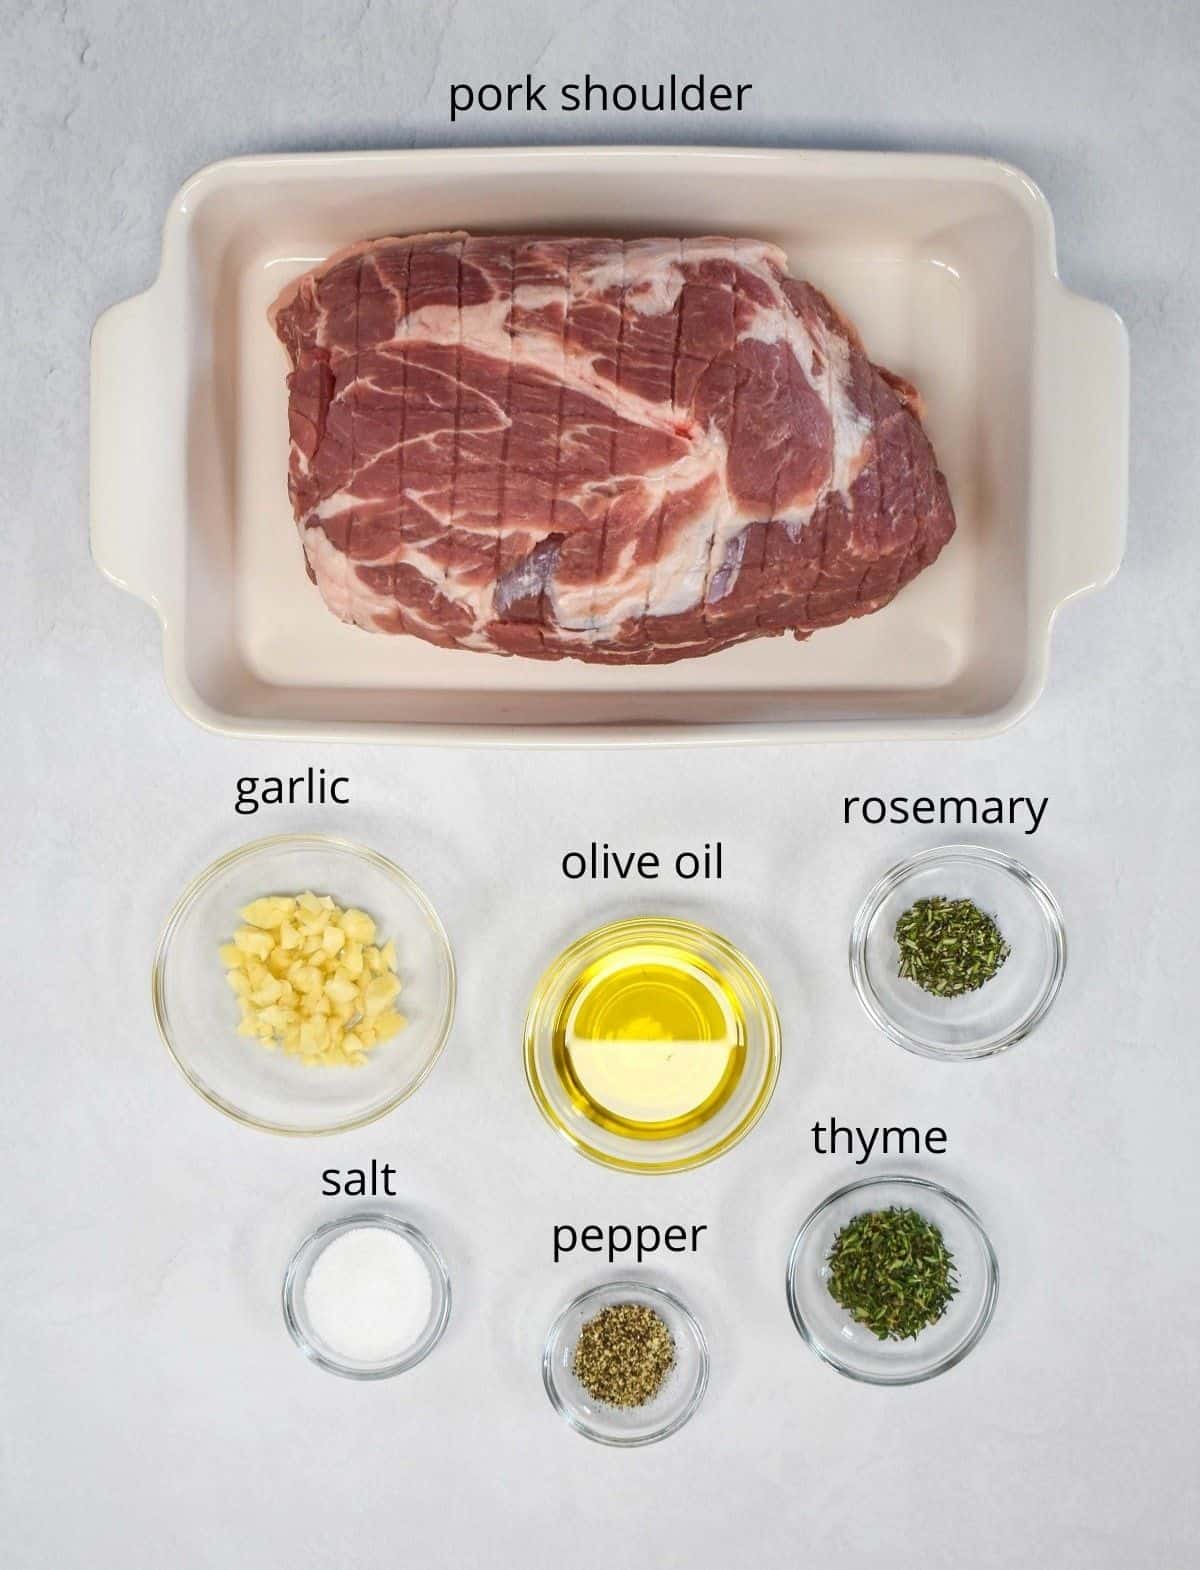 An image of the ingredients for the pork arranged on a white table. The pork is in a white baking dish and the rest of the ingredients are in glass bowls. Everything is set on a white table and each item has the name on top in small black letters.